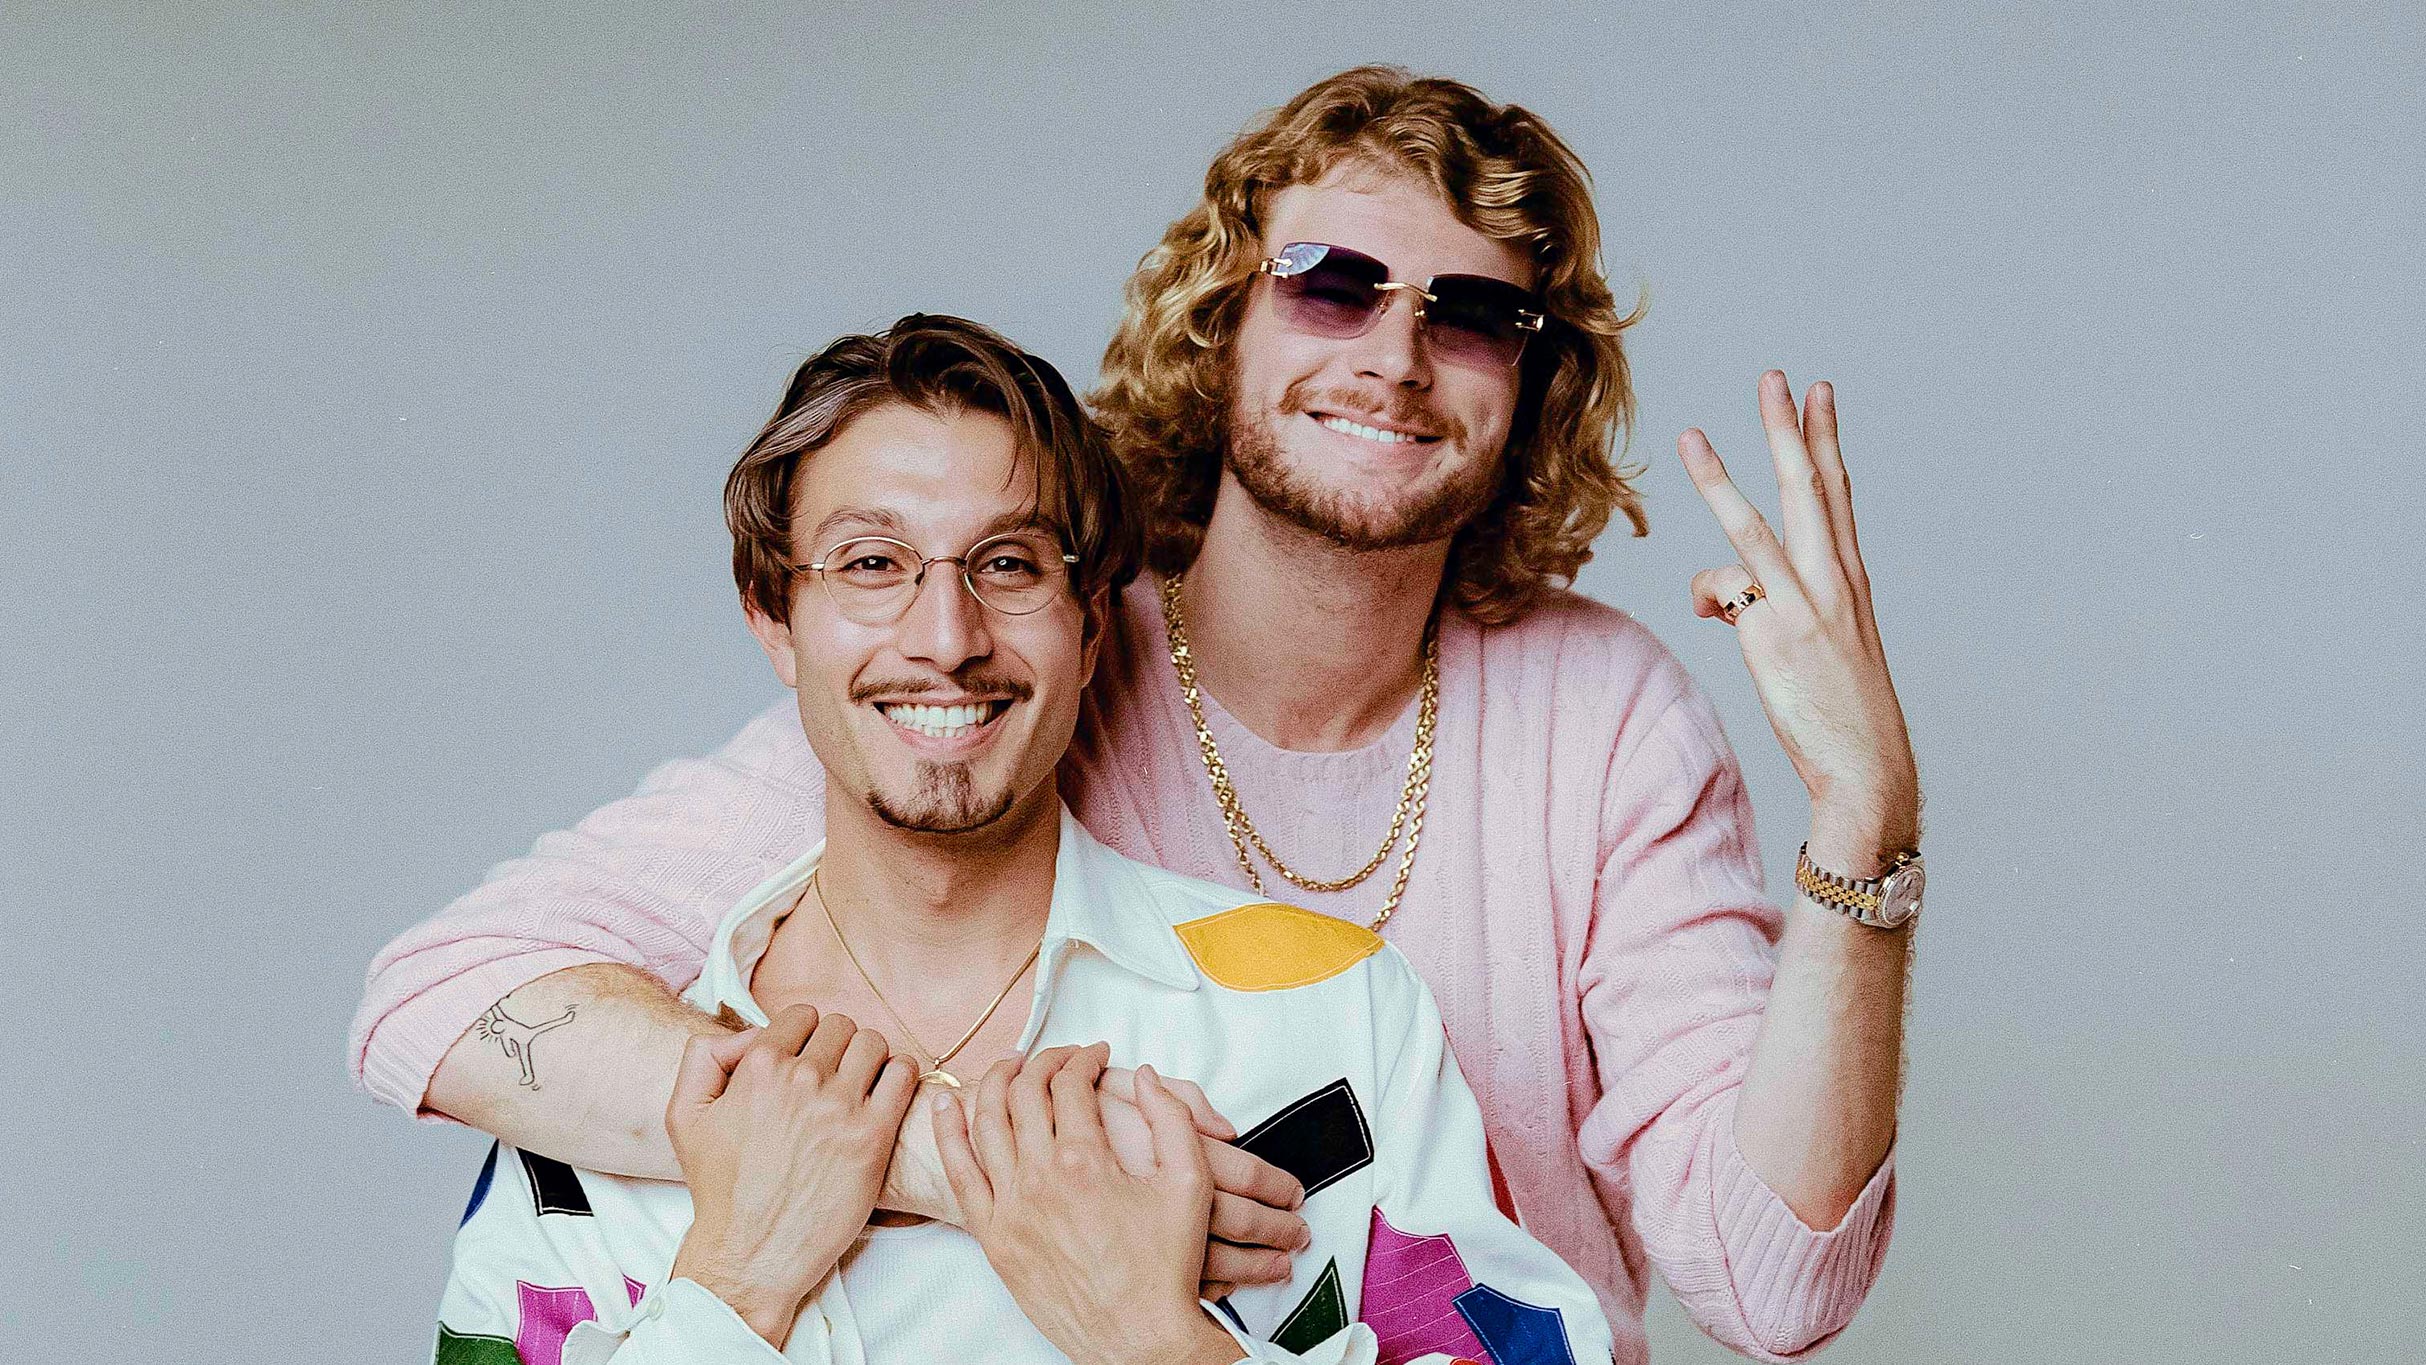 Baby Gravy (Yung Gravy & bbno$) in Auckland promo photo for Live Nation presale offer code